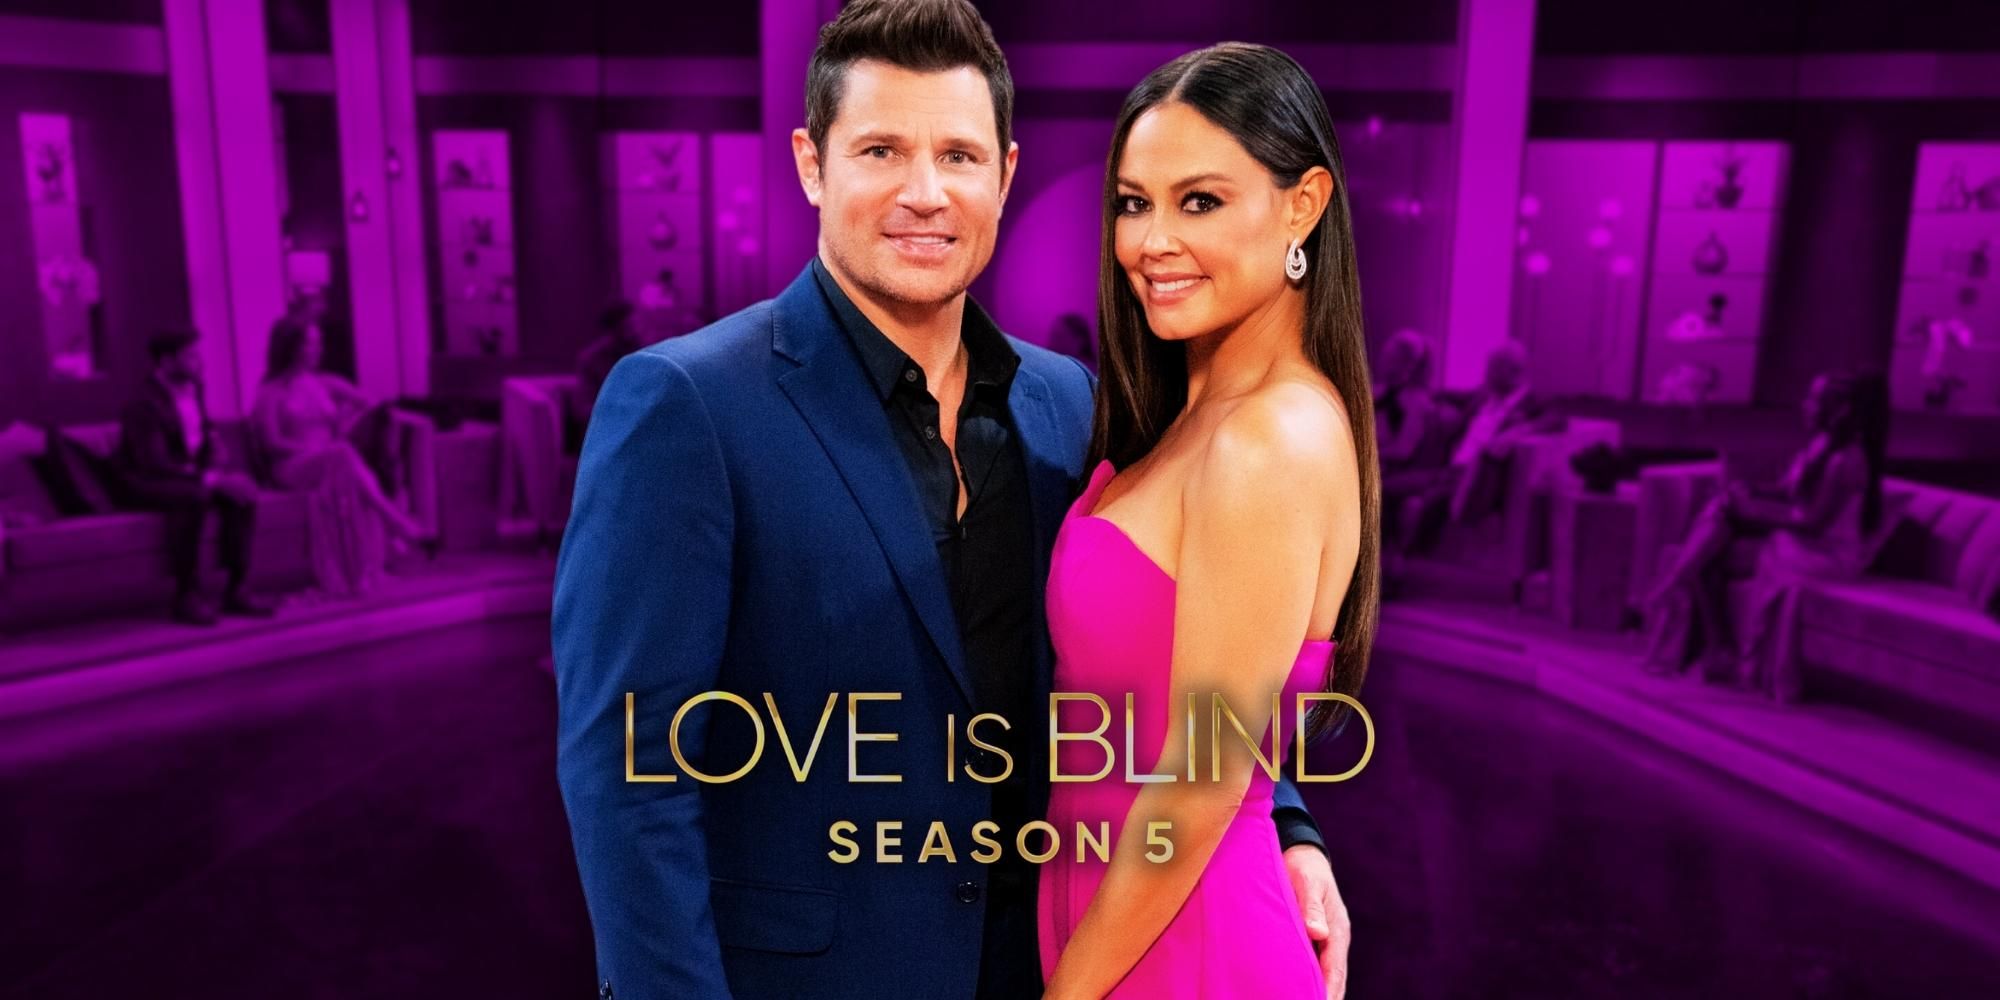 5 quirky dating reality shows like Love is Blind